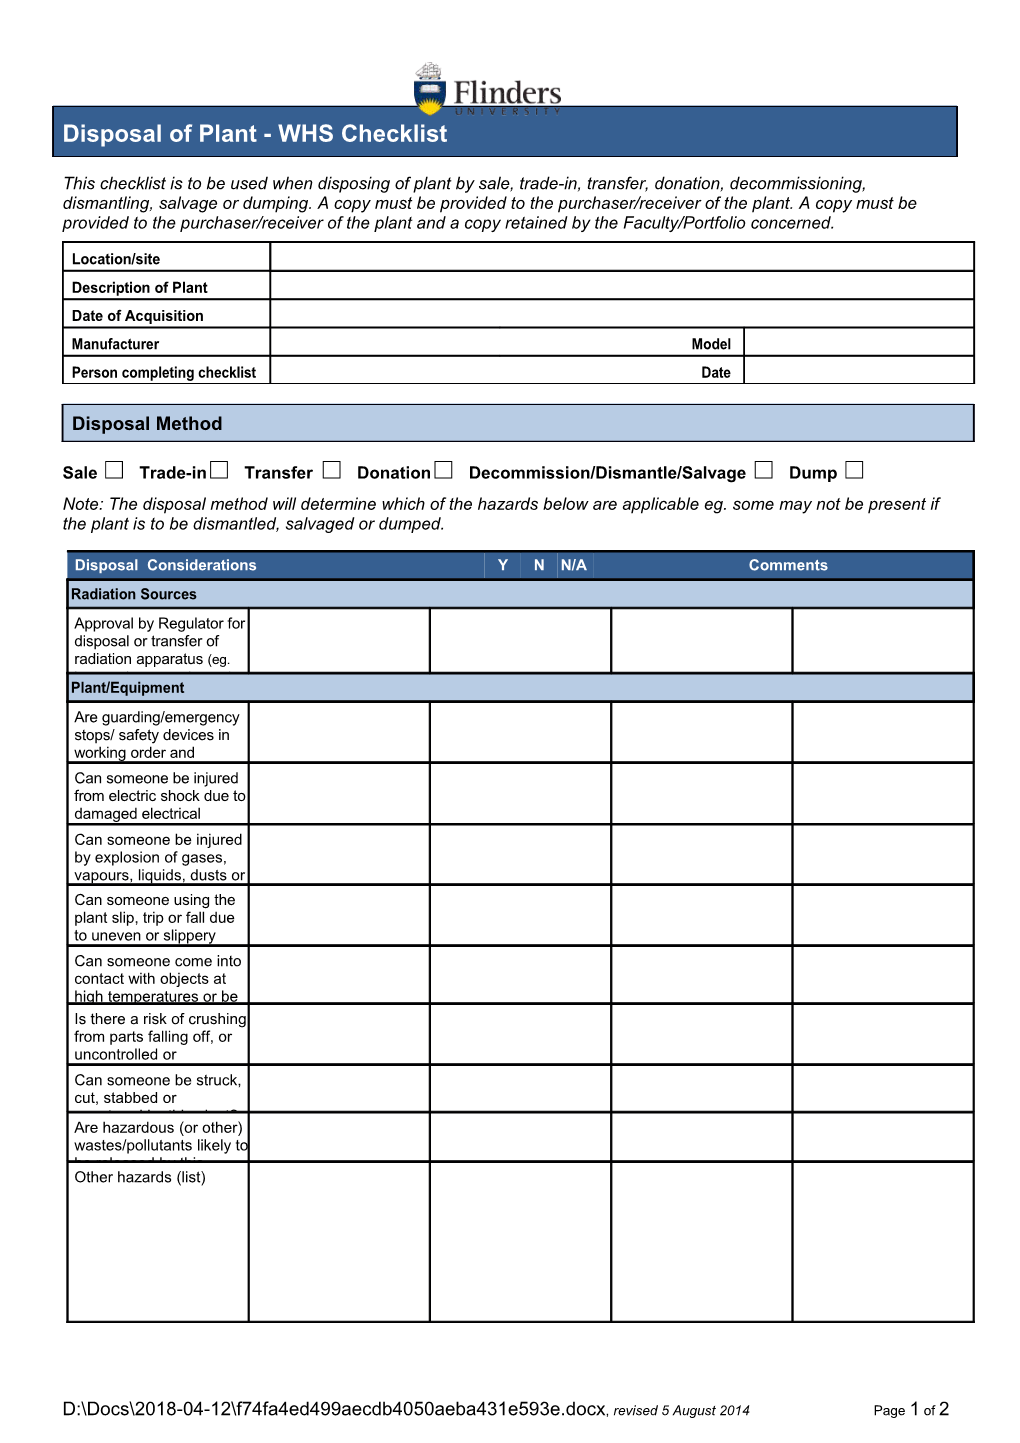 Disposal of Plant - WHS Checklist